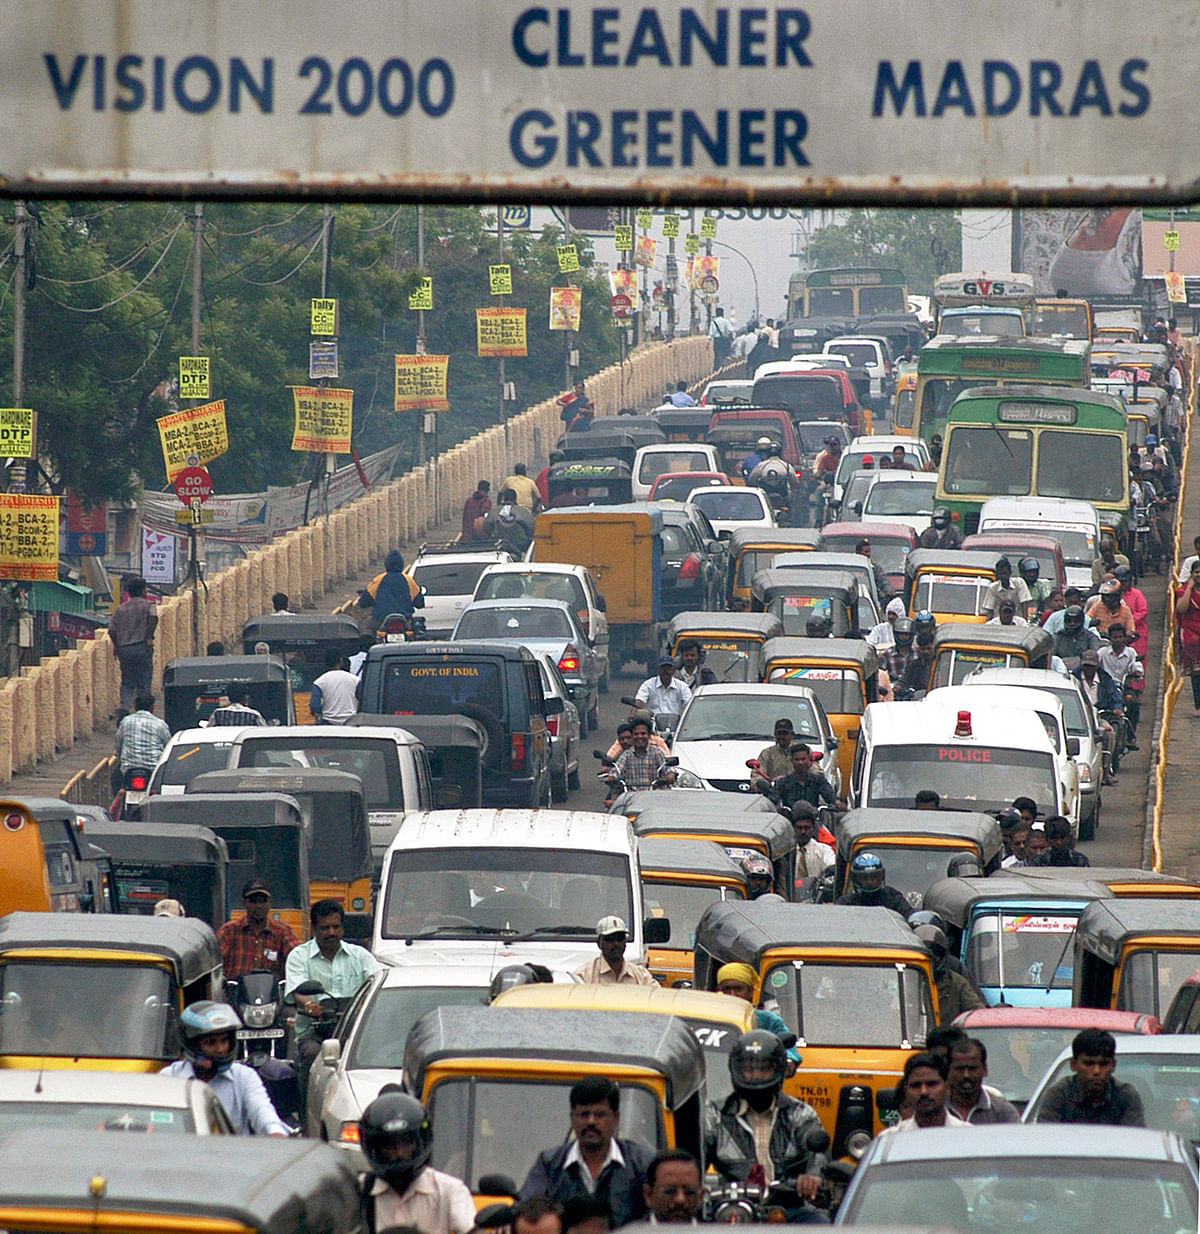 Something akin to Delhi’s odd-even plan does make sense in Indian cities as they battle against poor air quality.